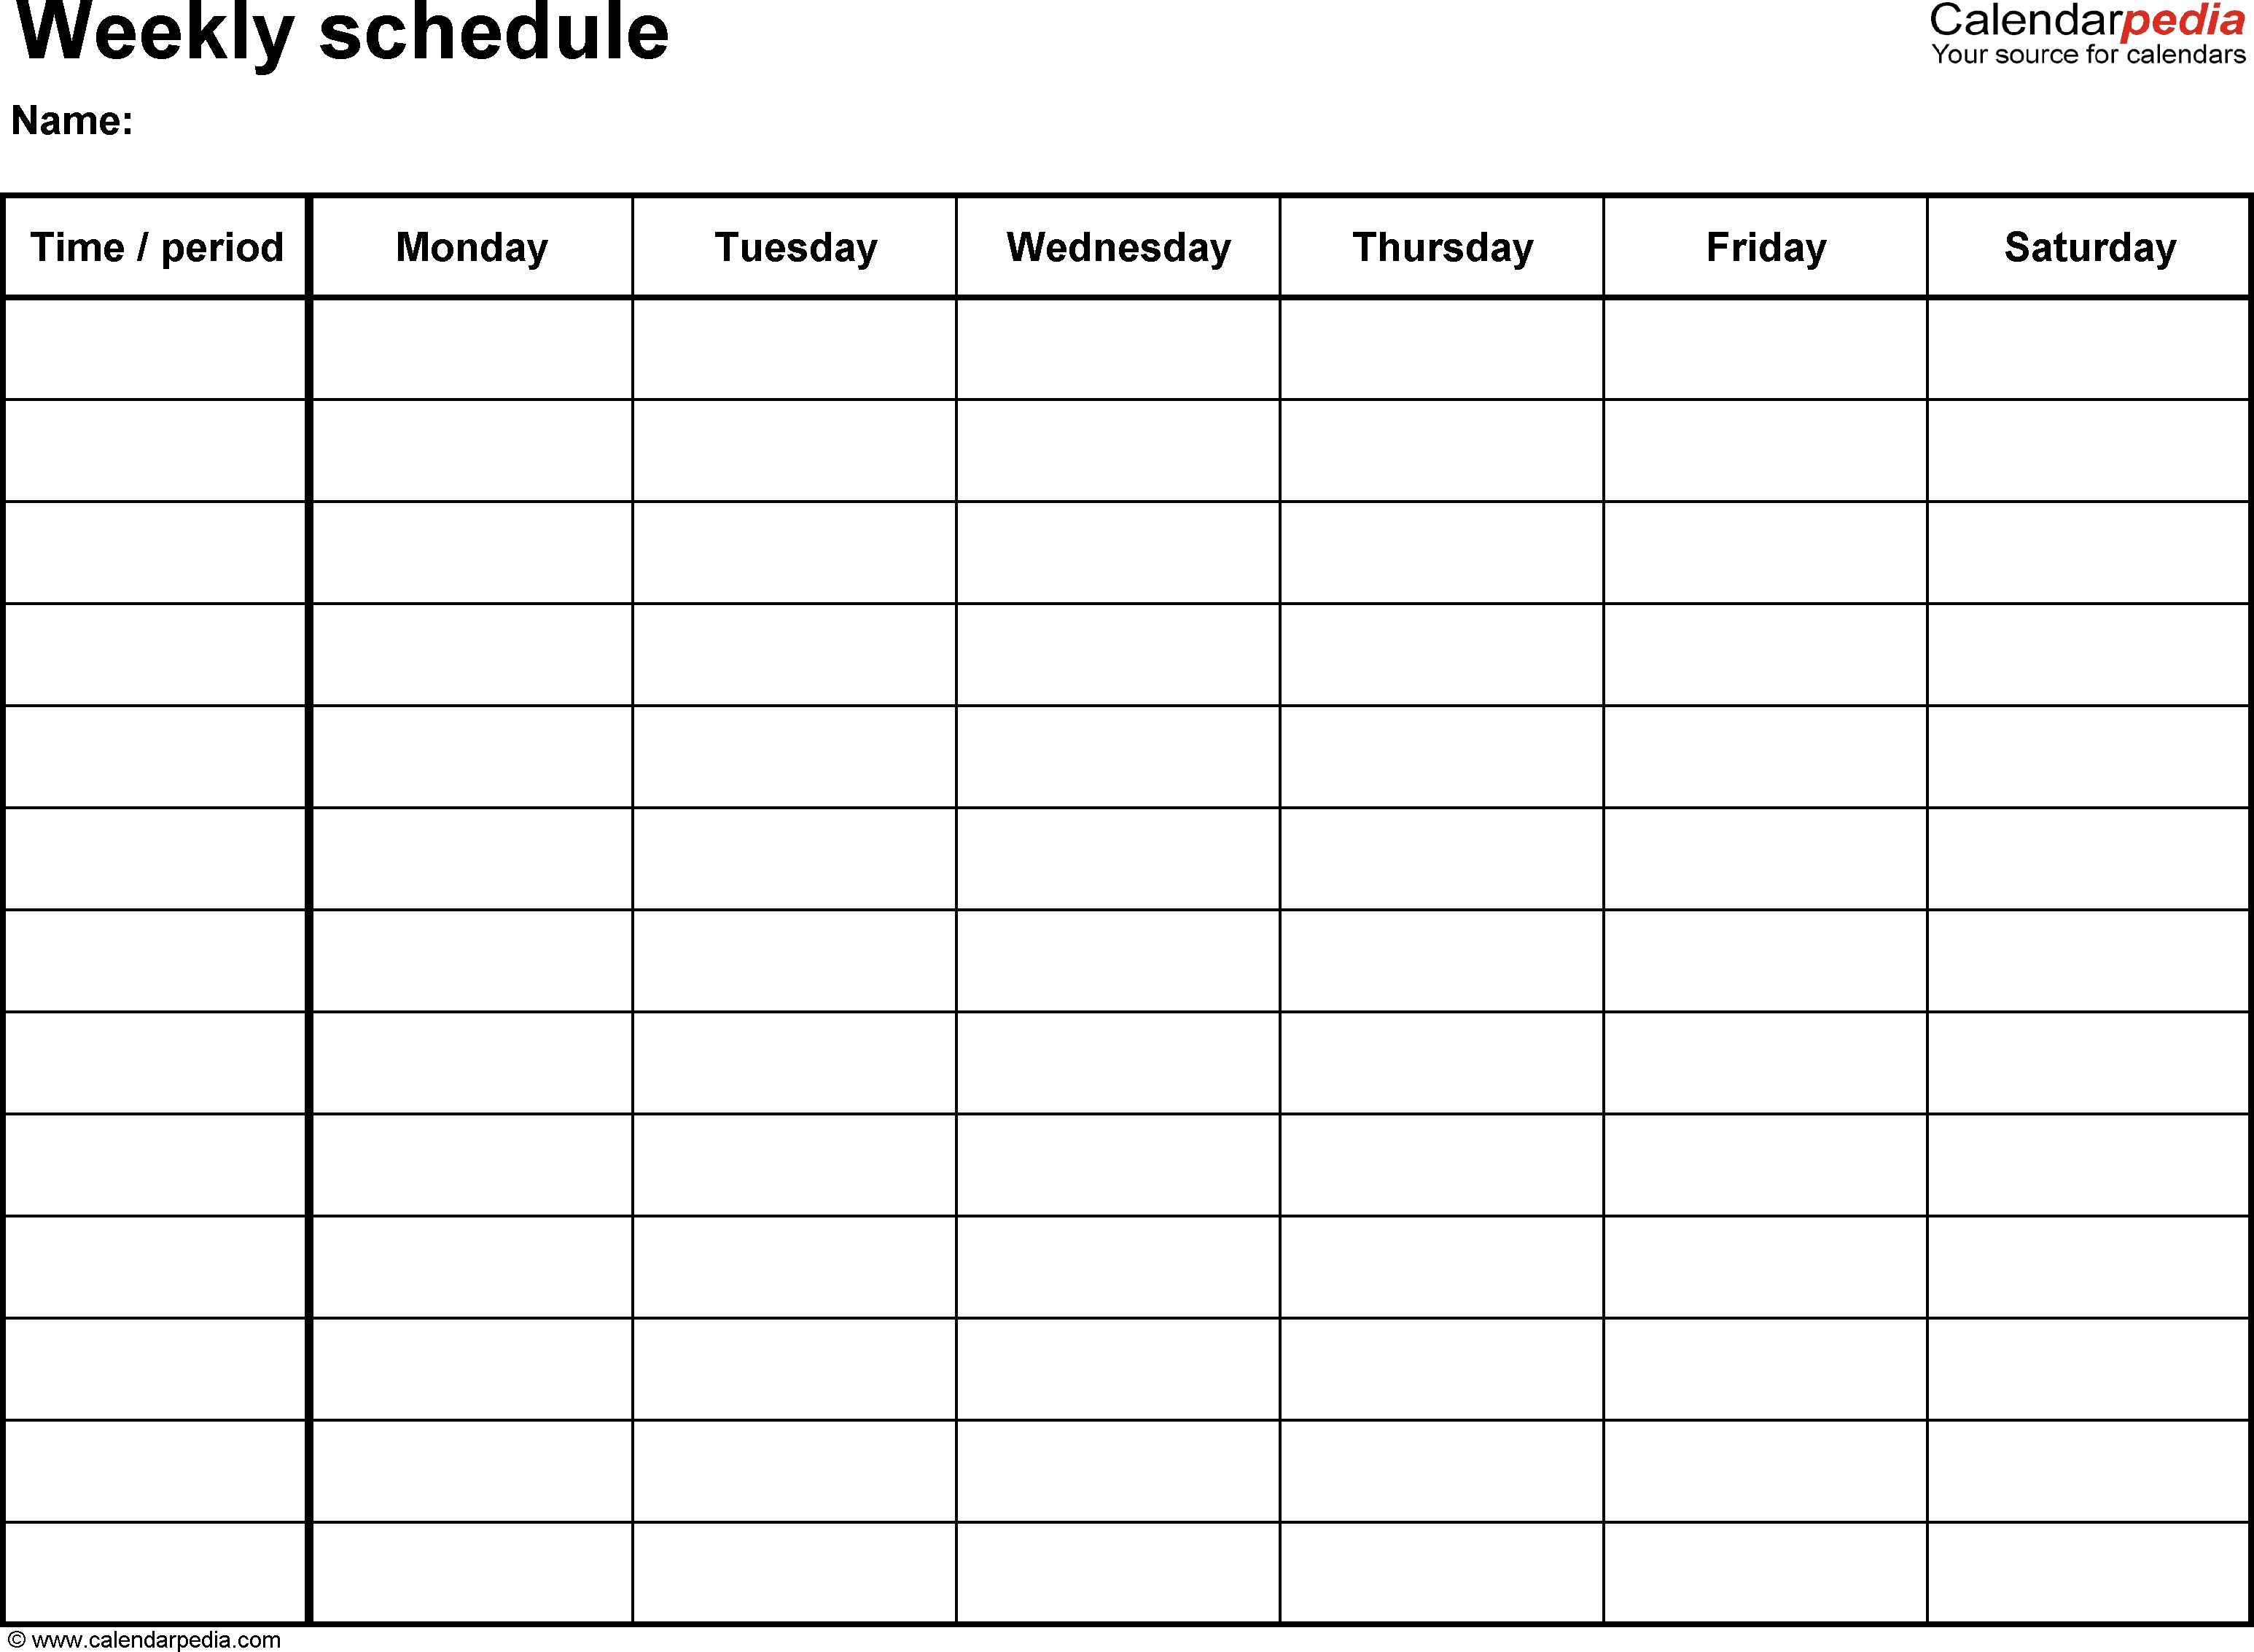 Free Weekly Schedule Templates For Word – 18 Templatesblank intended for Fill In Calendars